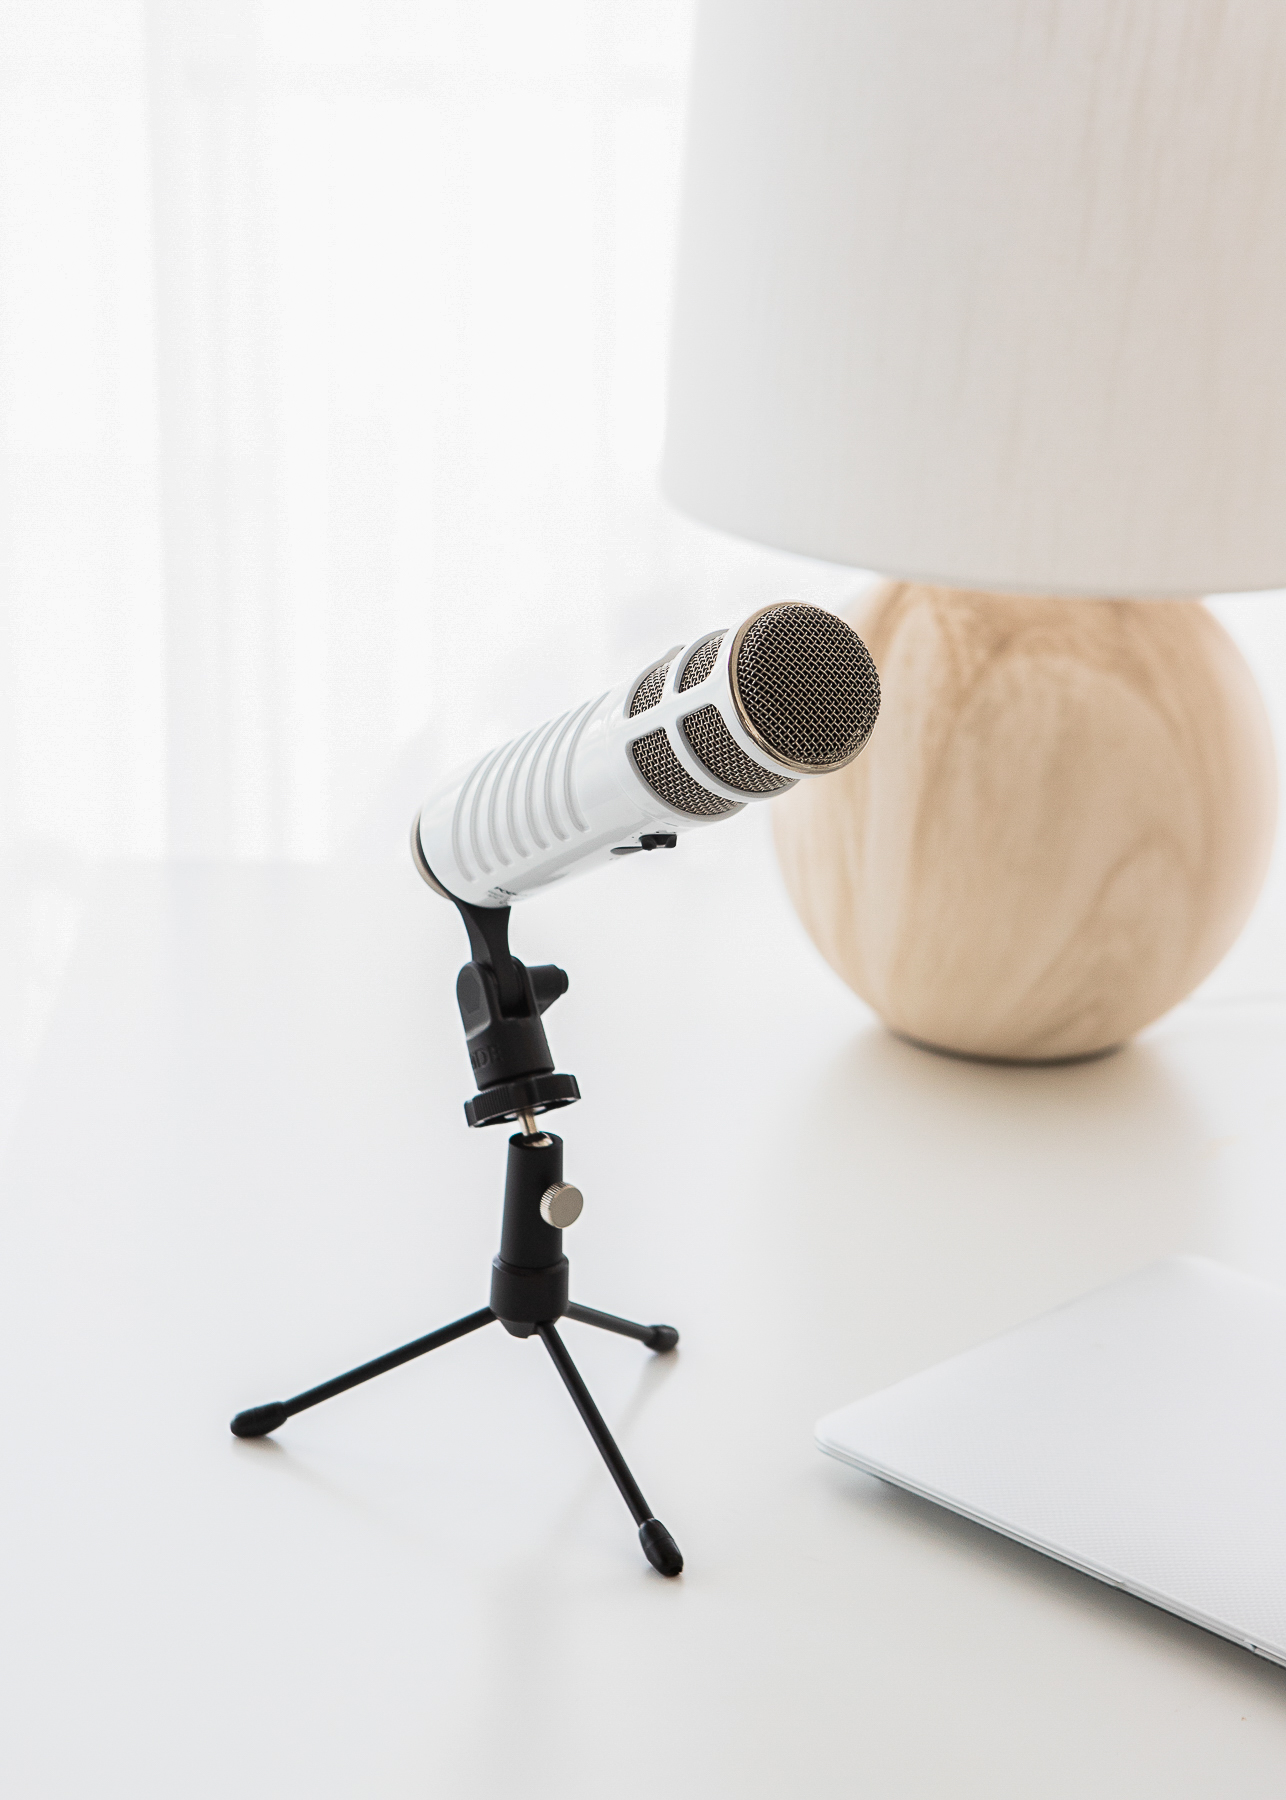 Podcasts every business owner should listen to